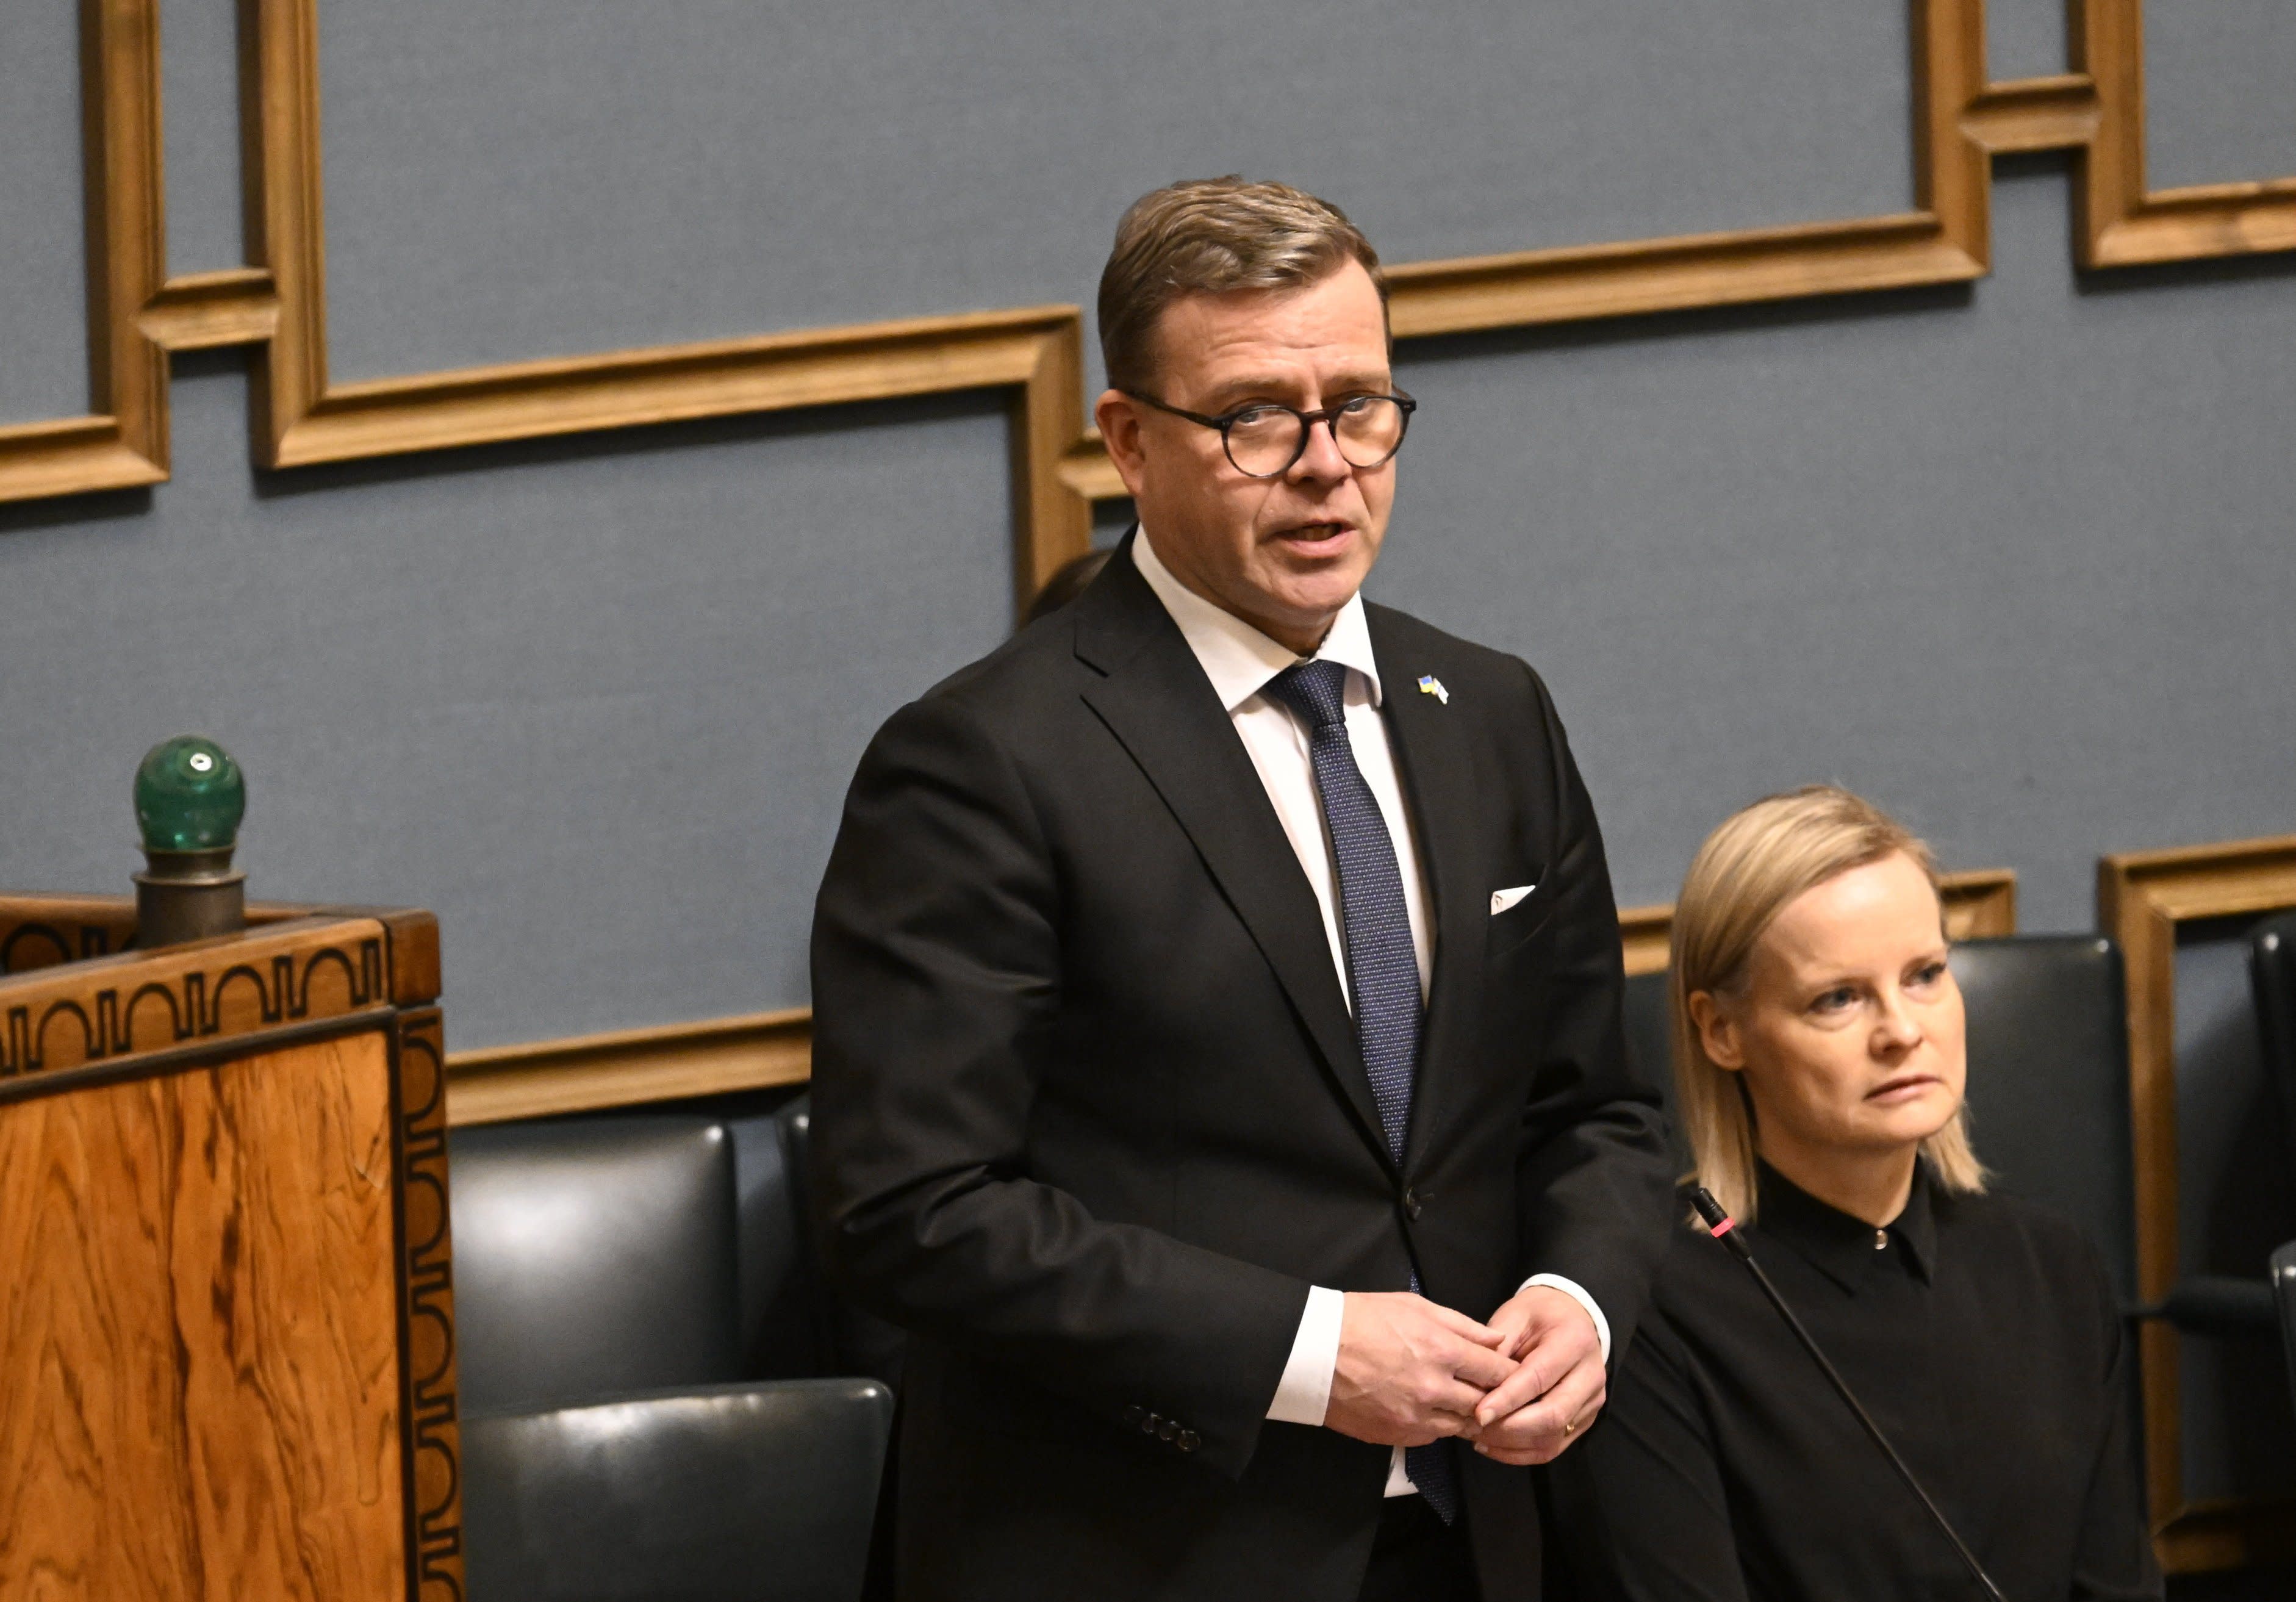 PM Orpo invites trade unions, employer groups to the negotiation table